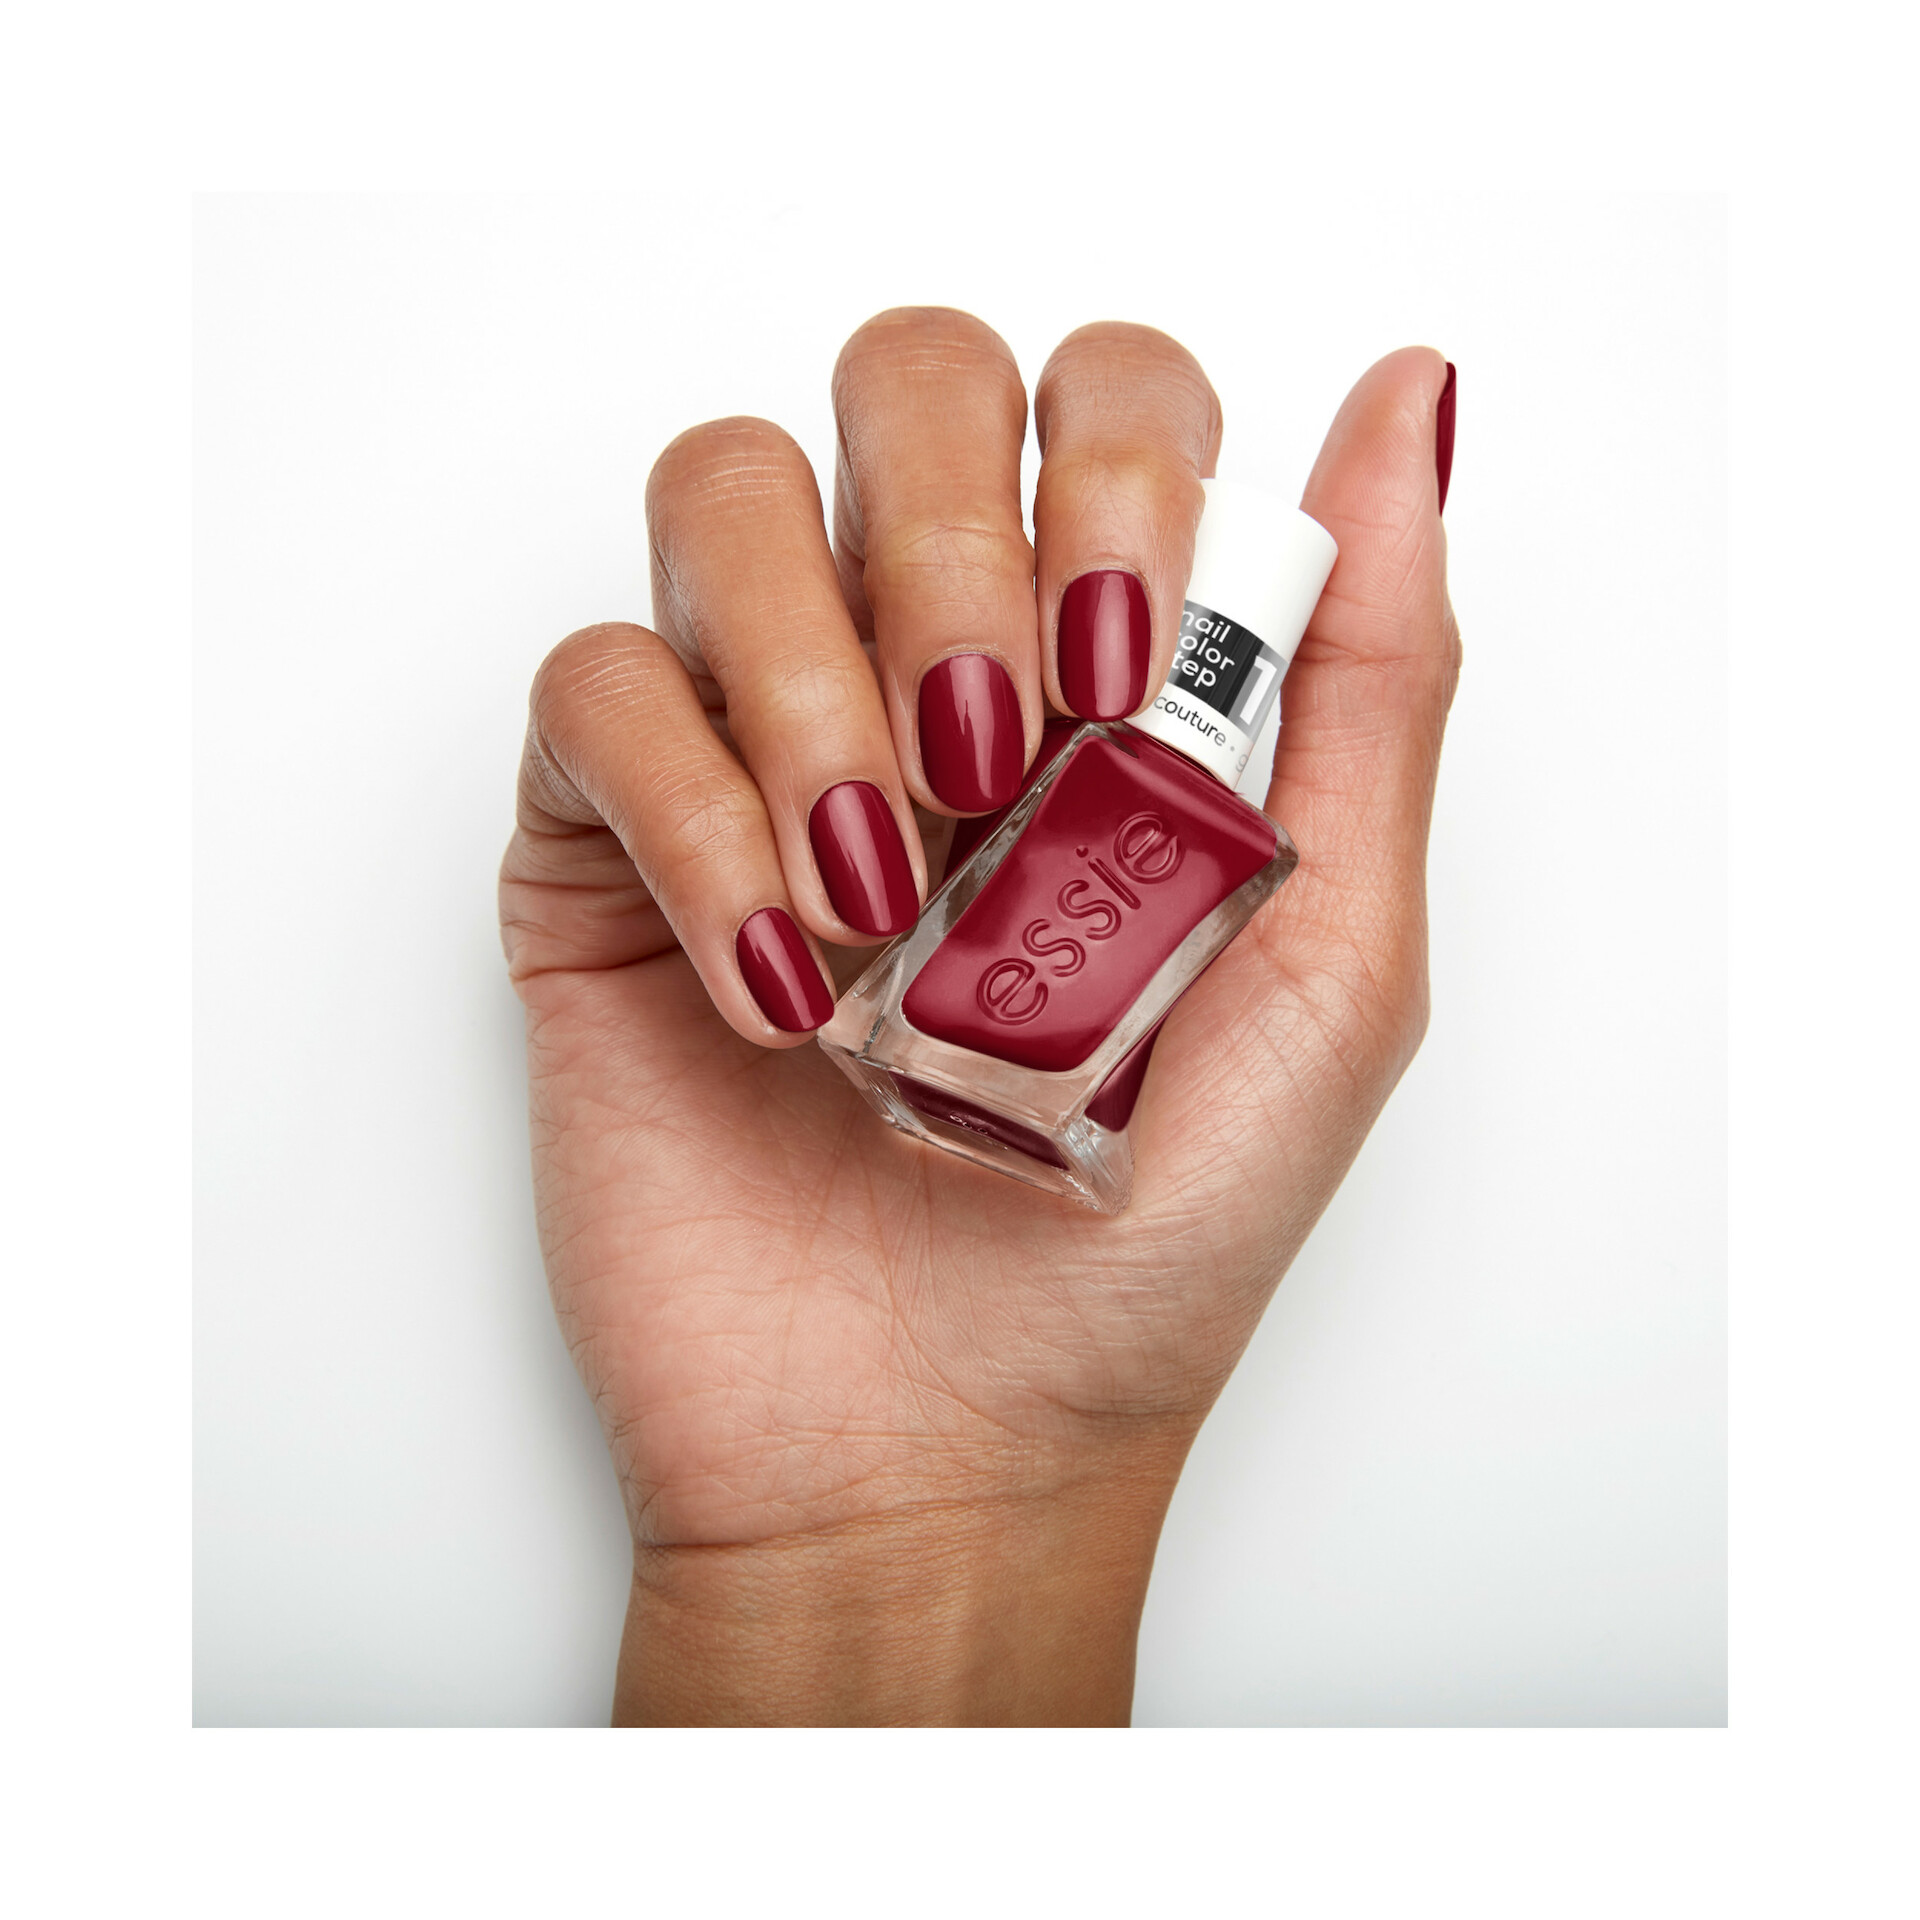 Nail Polish - Not Red-y For Bed 748 Pillow Talk The Talk - Essie - KICKS